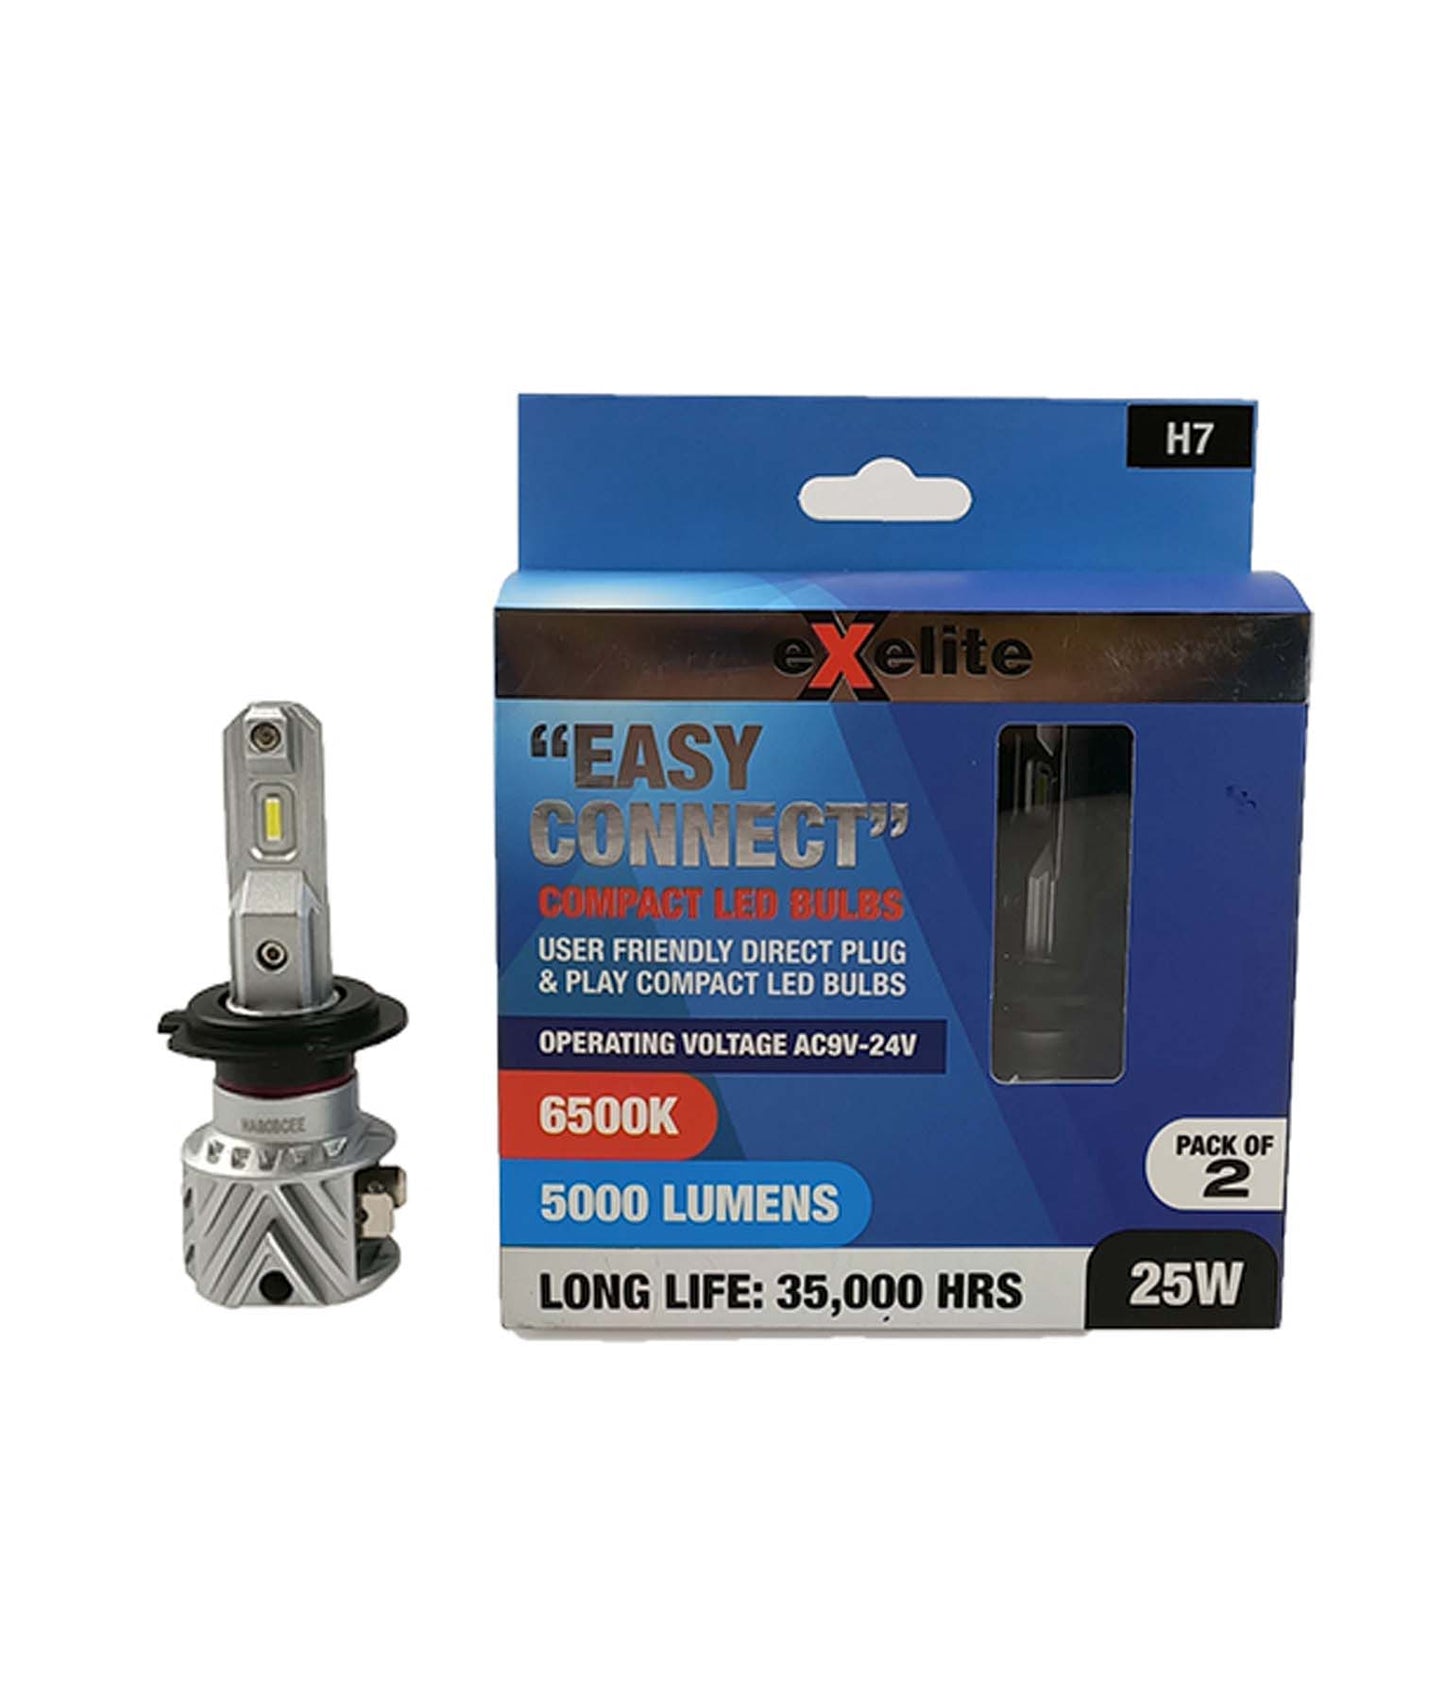 Easy Connect: User Friendly Direct Plug & Play Compact LED Globes (2pcs Pack)